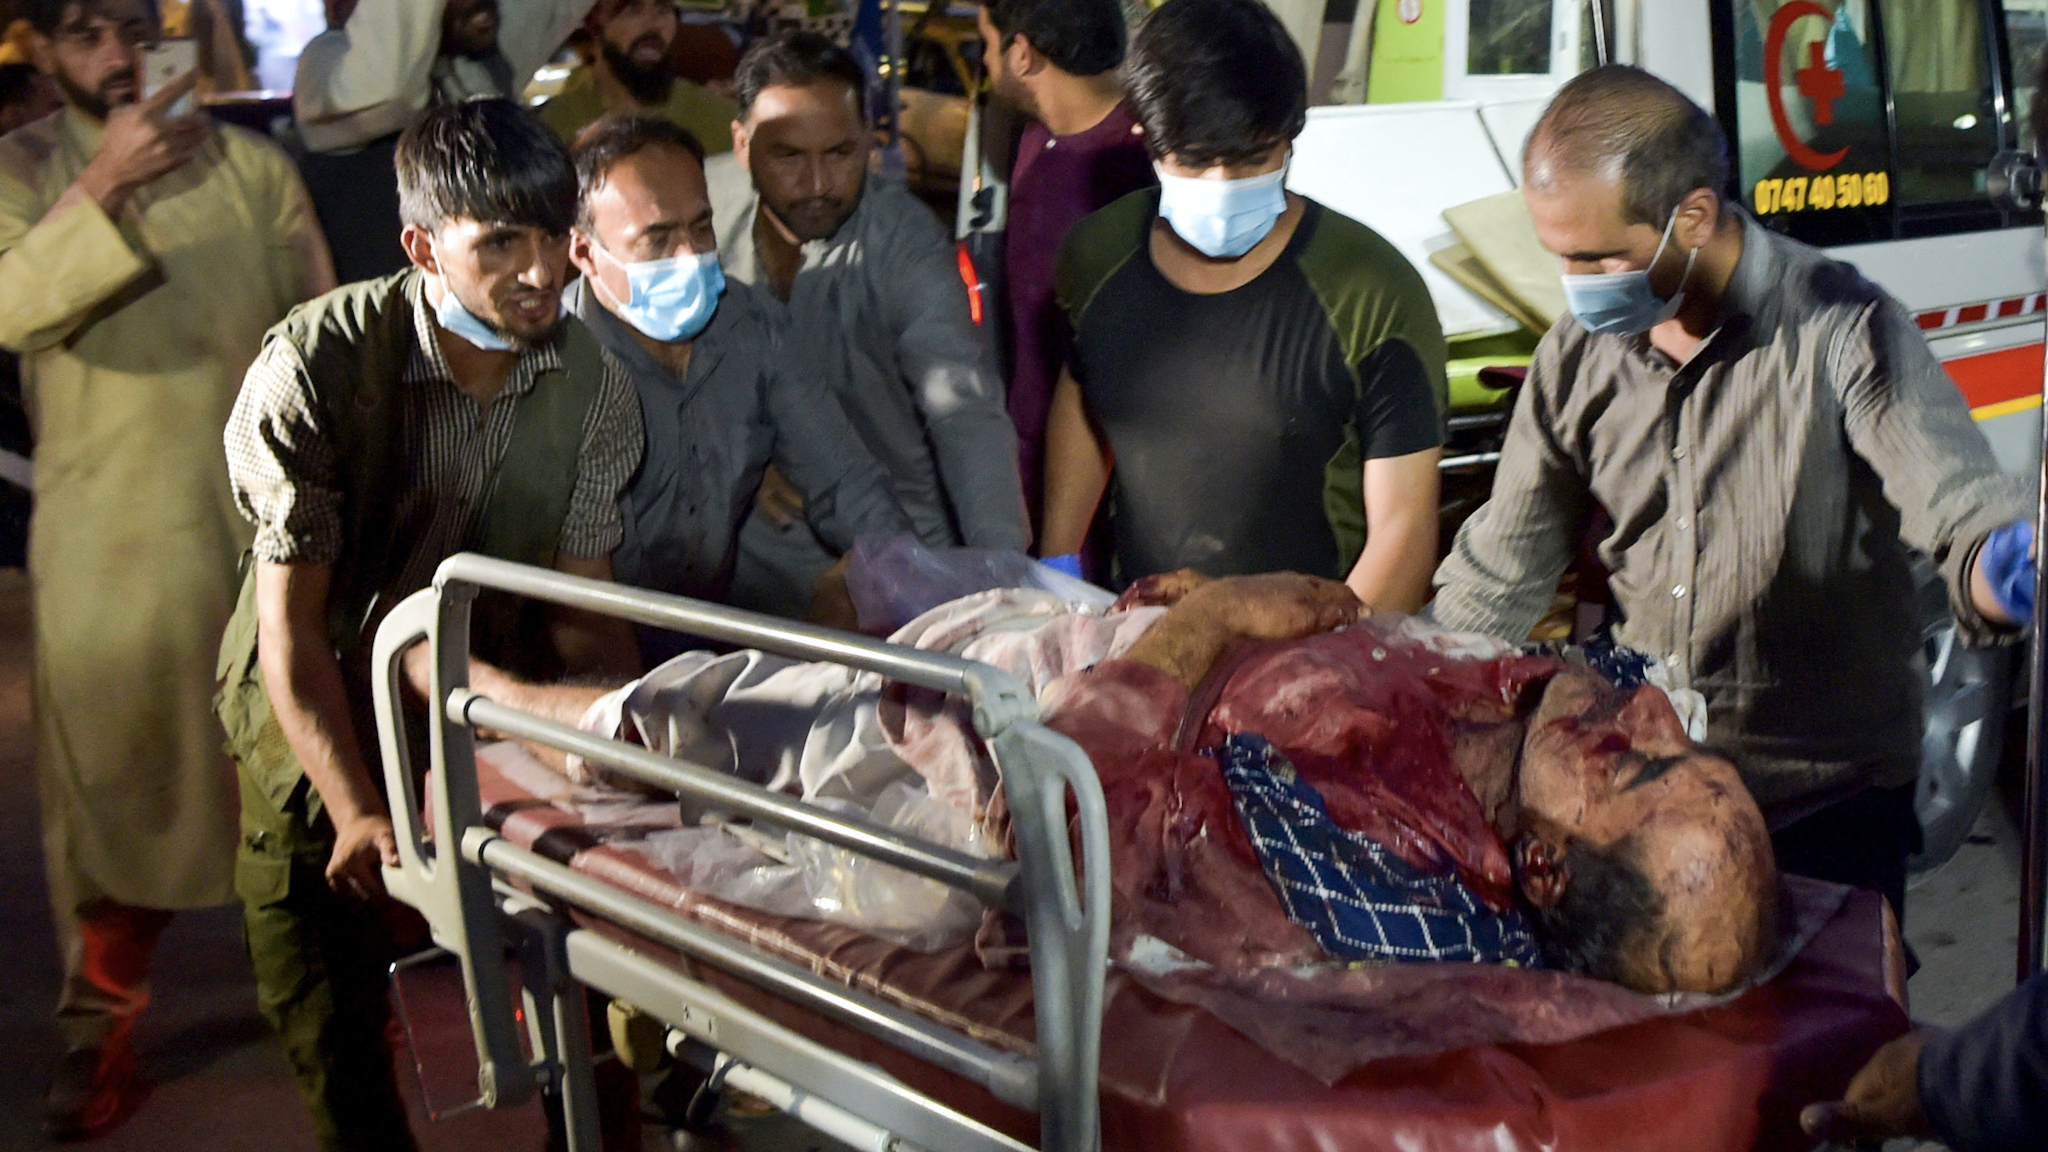 Graphic content / Volunteers and medical staff bring an injured man for treatment after two powerful explosions, which killed at least six people, outside the airport in Kabul on August 26, 2021.